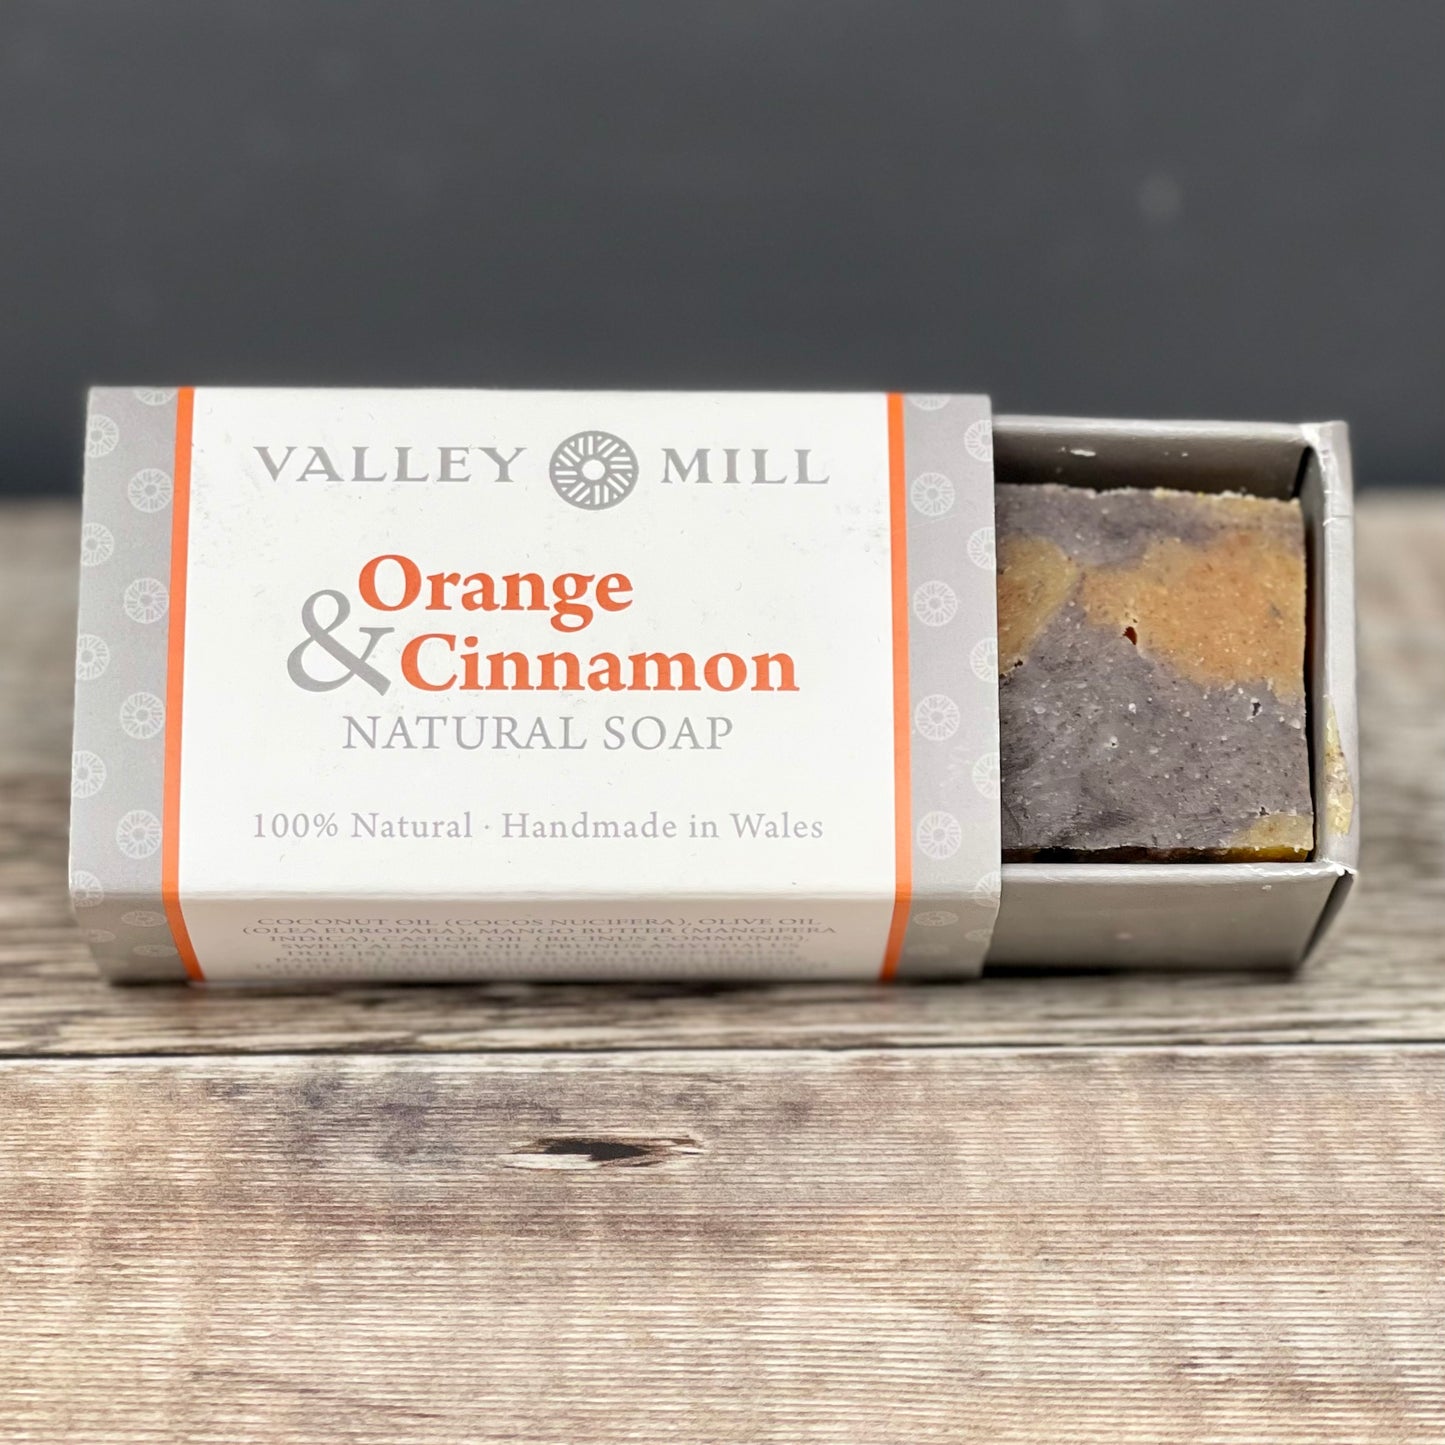 Orange and Cinnamon Soap by Valley Mill